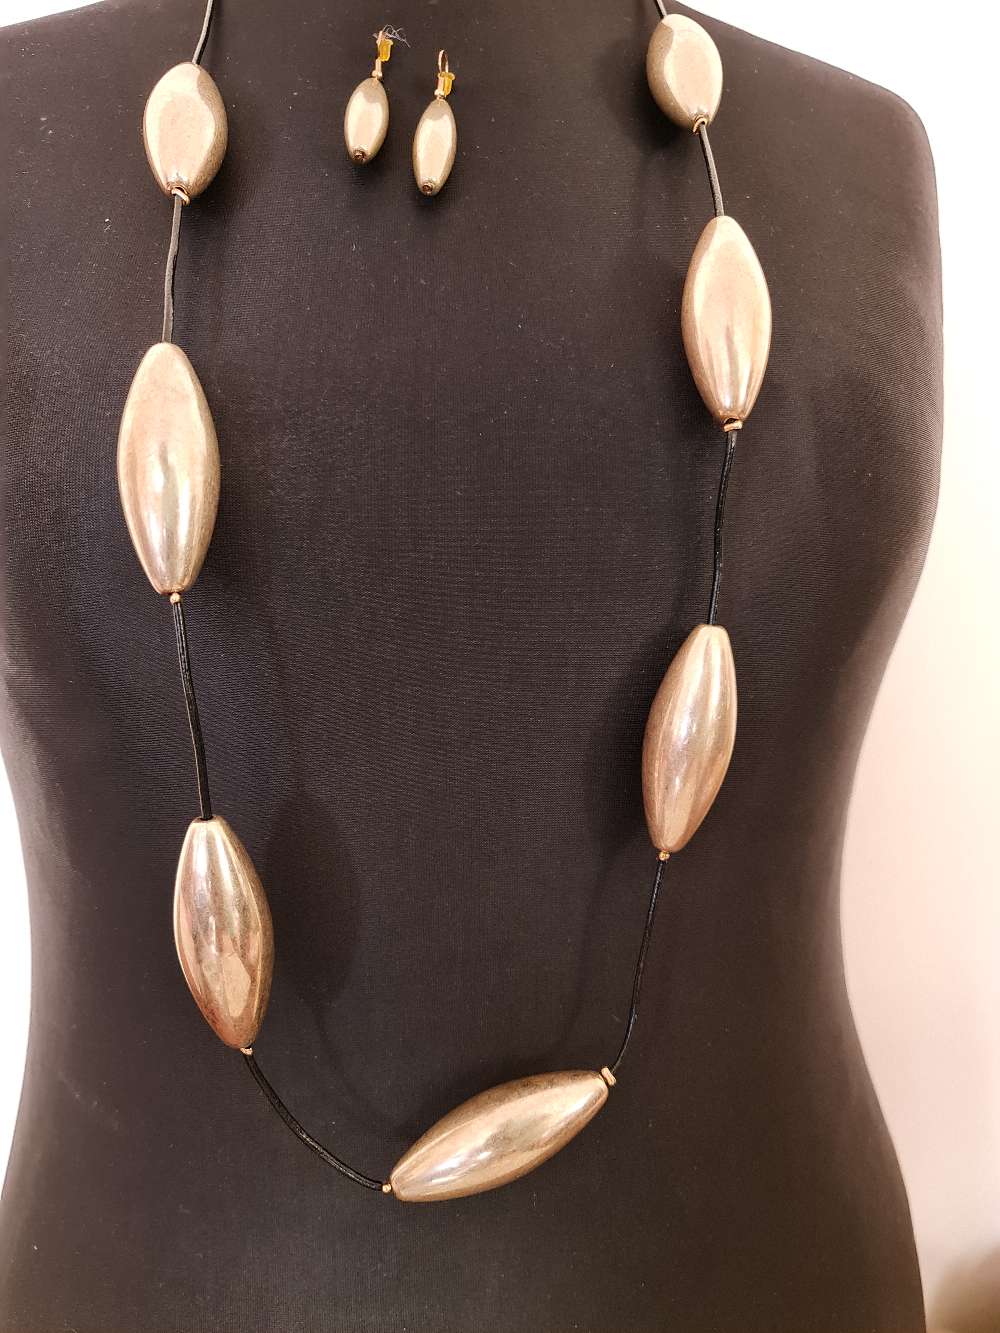 Ashabi Long Necklace and Earrings